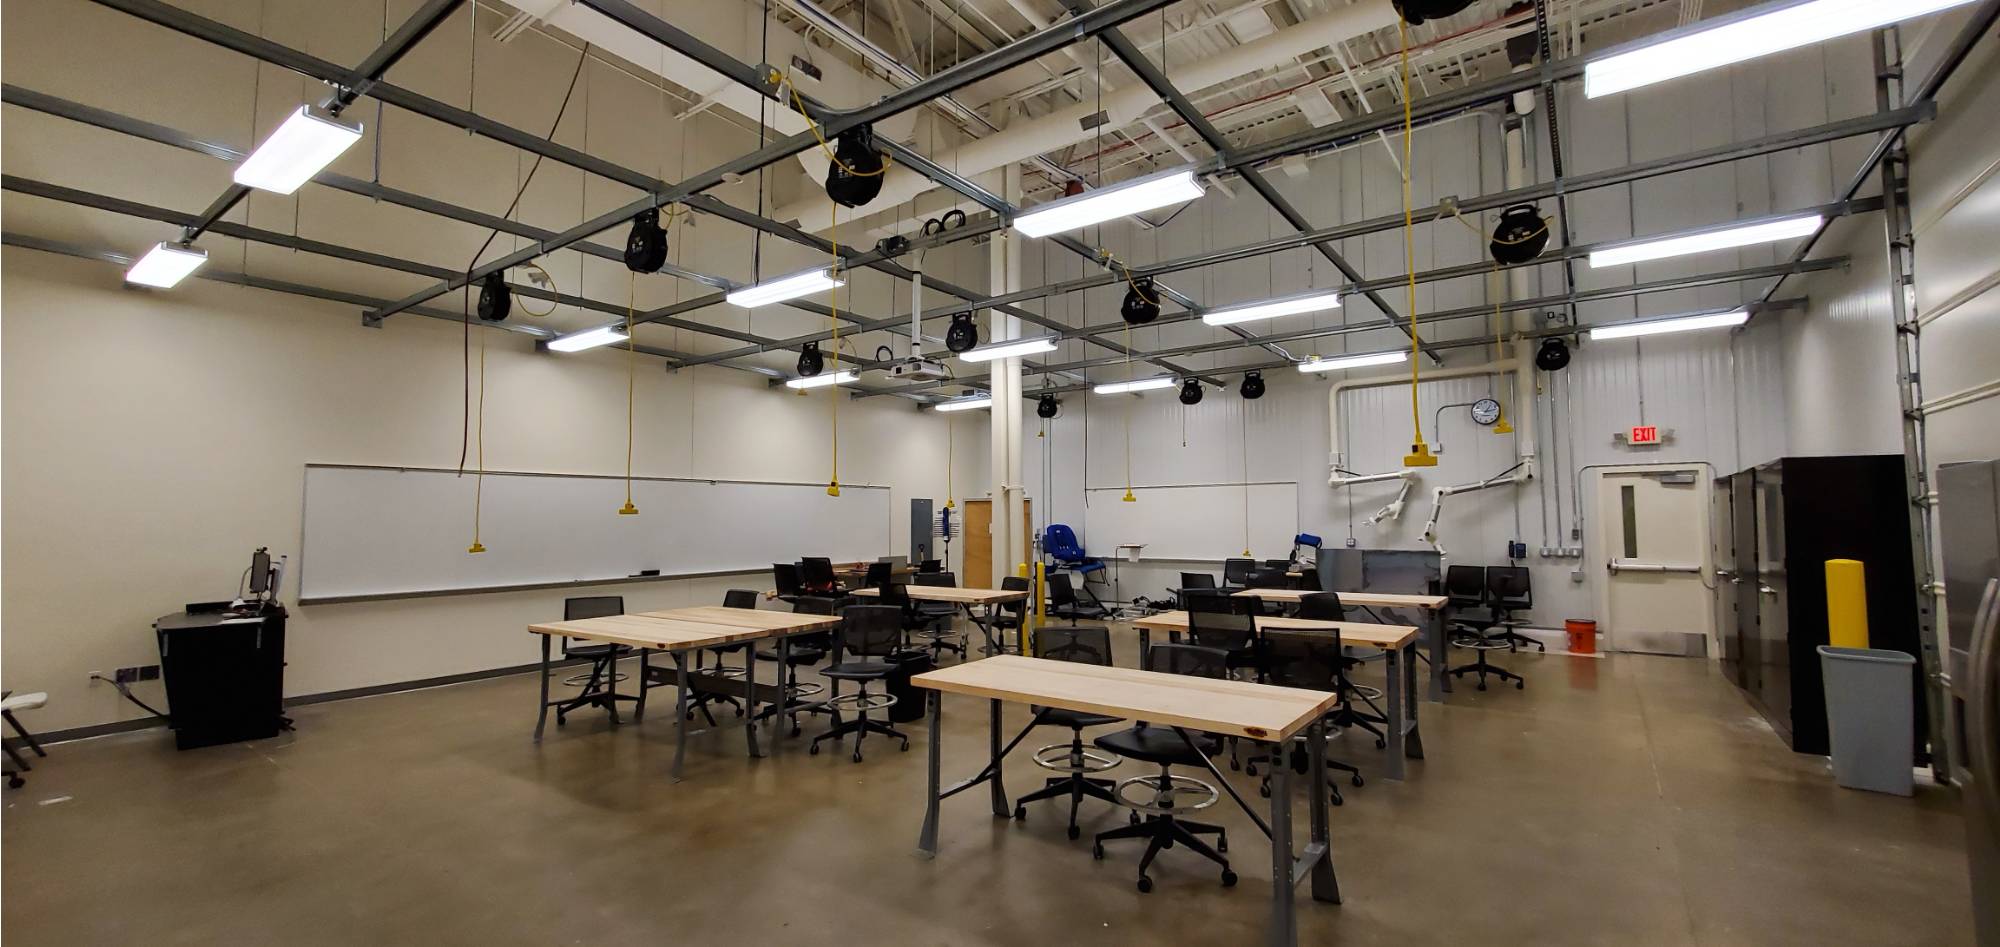 overall view of the product design studio